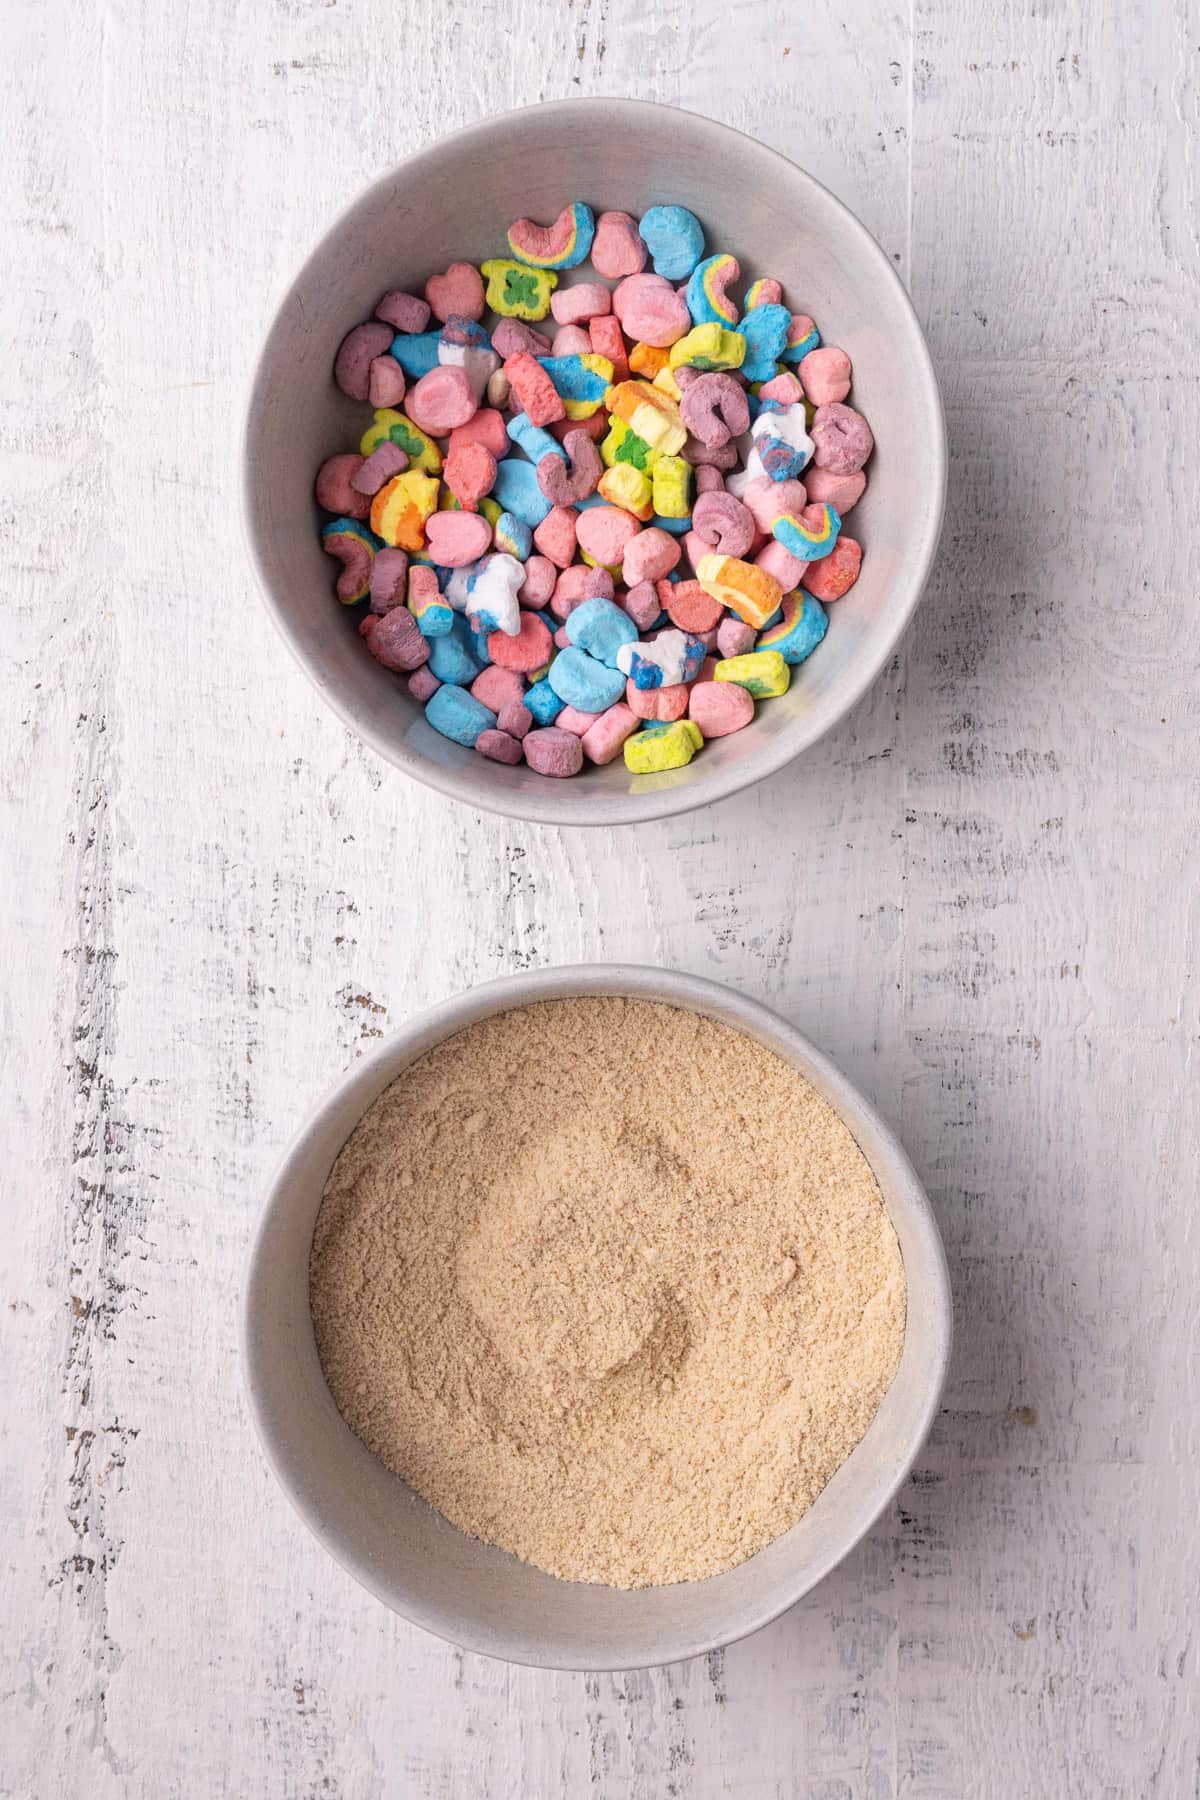 Bowl of Lucky Charms marshmallows only, and second bowl of ground up cereal.